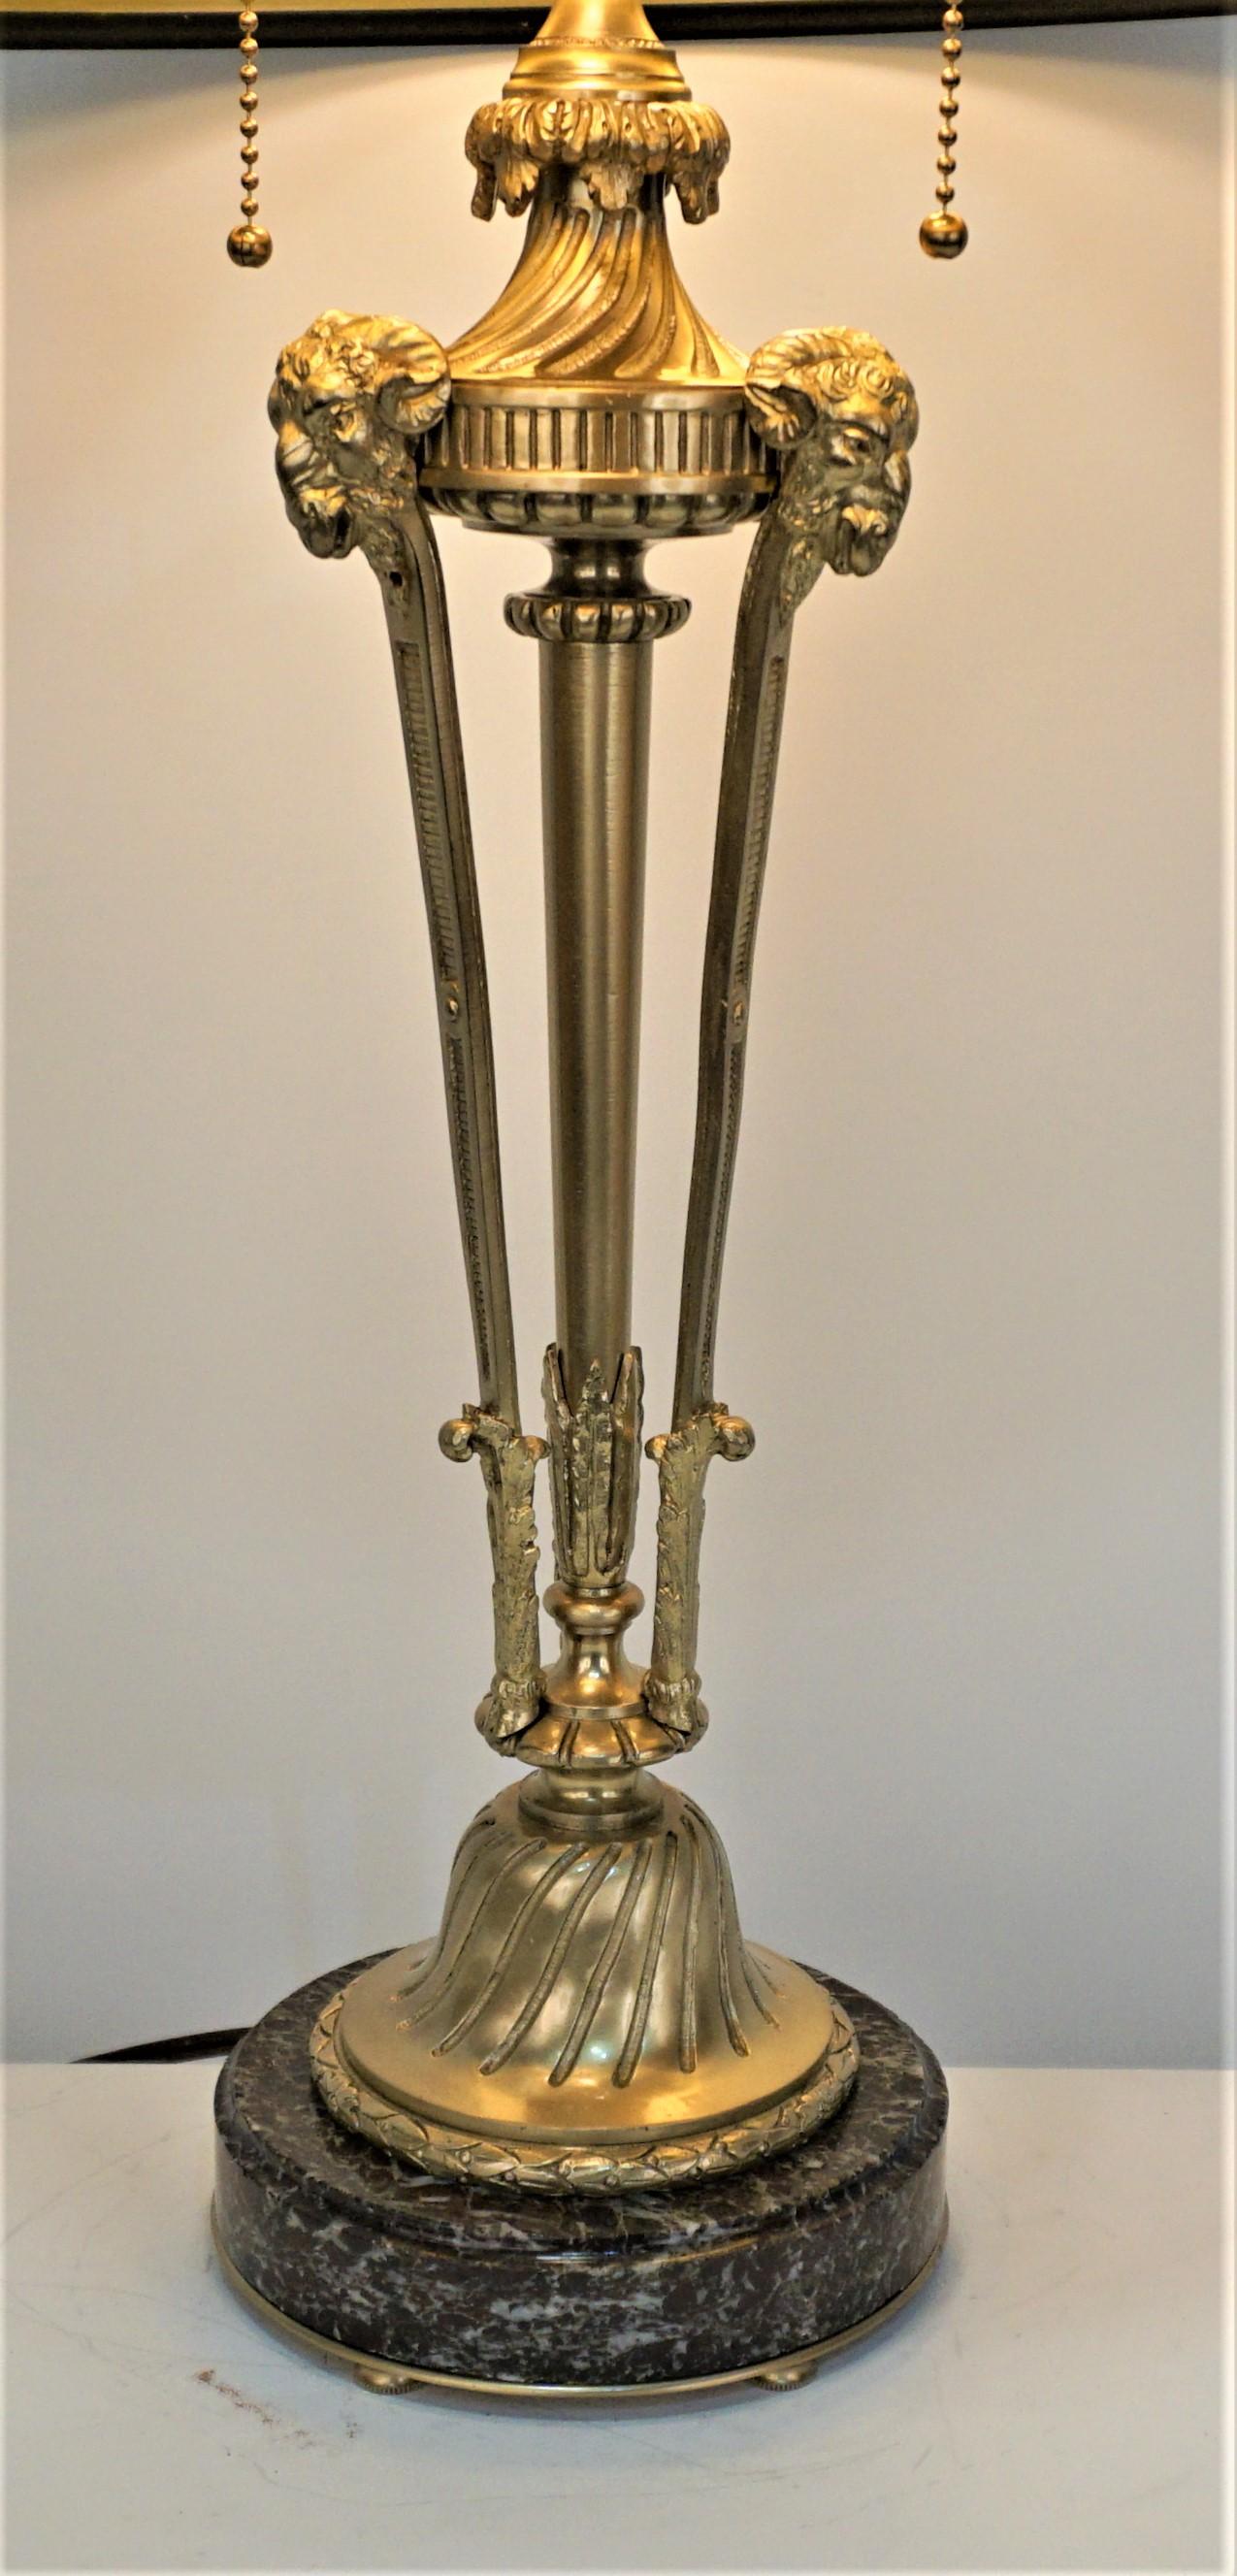 French 19th century Empire double light bronze and marble table lamp.